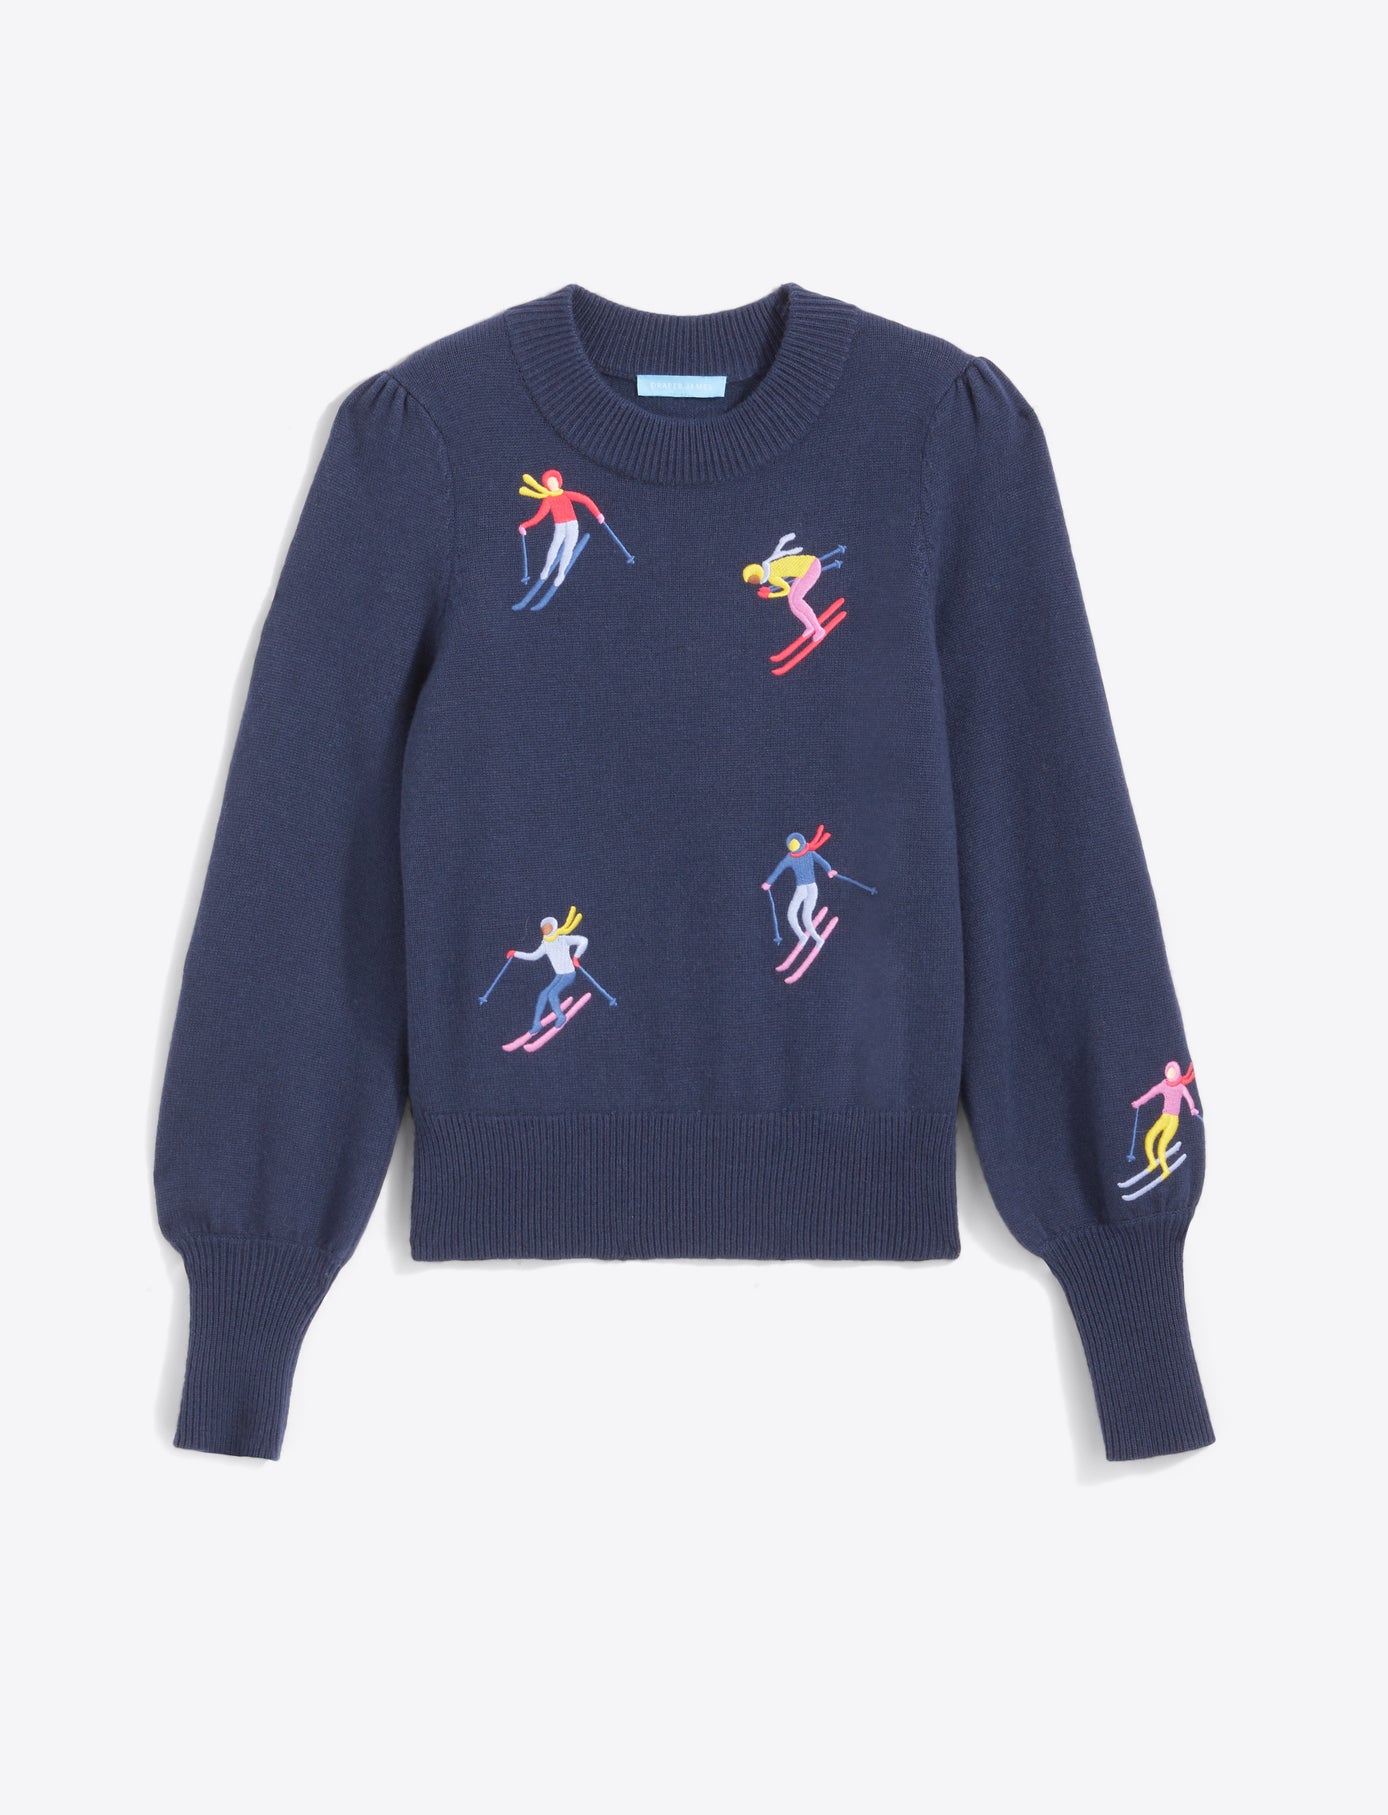 Crewneck Sweater in Embroidered Skier